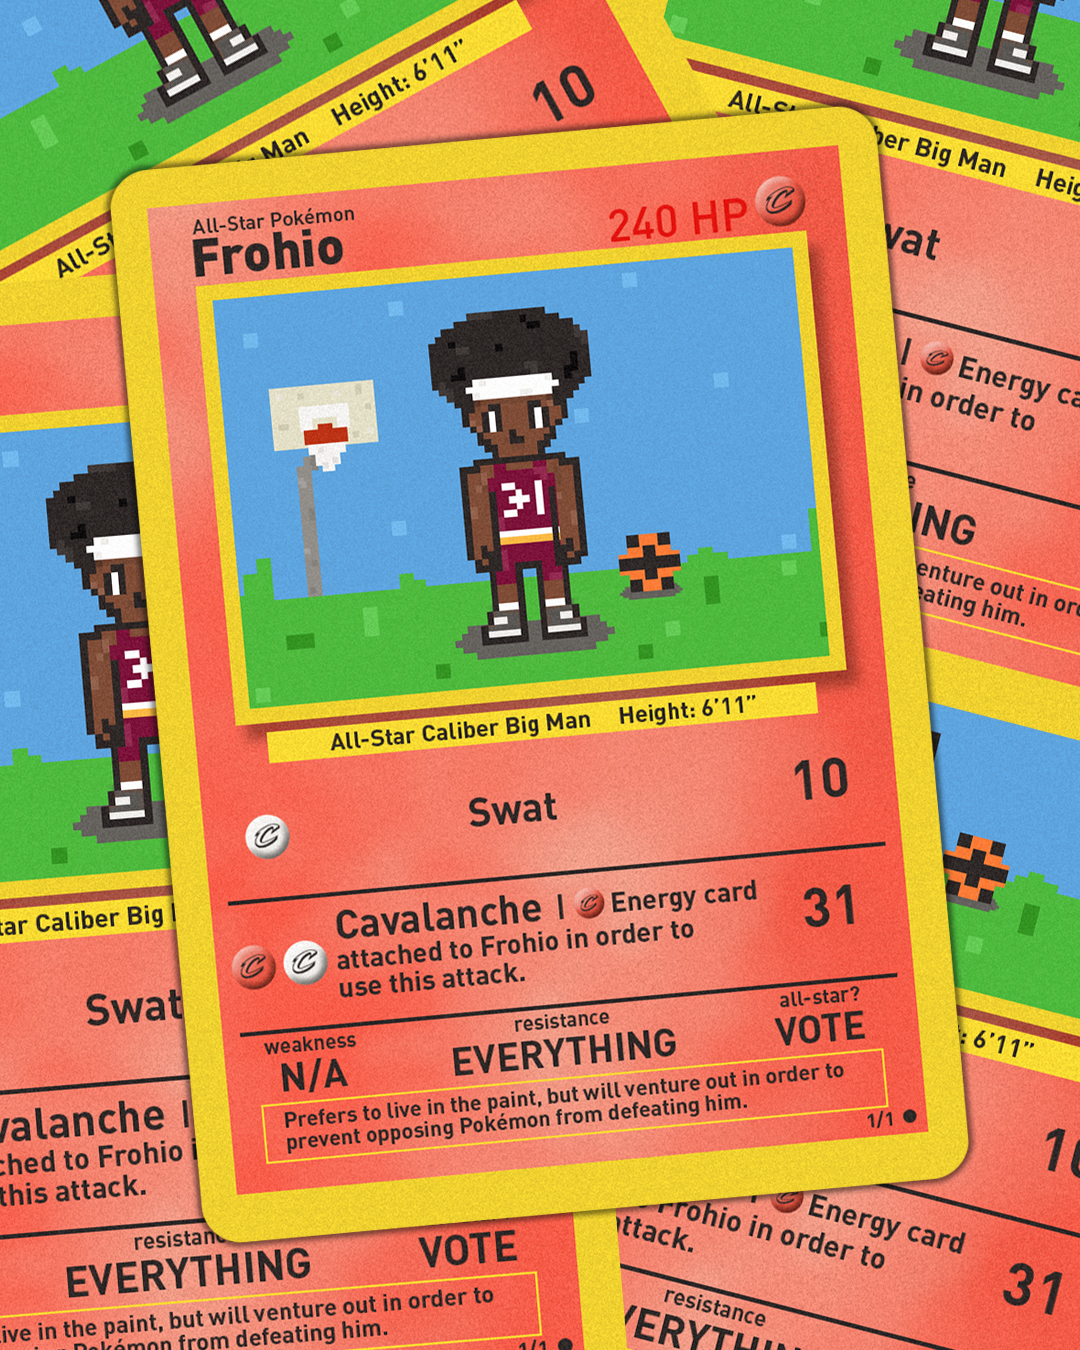 Another new #Pokemon leaked  Double-tap if you'd choose #FROHIO for your squad ...